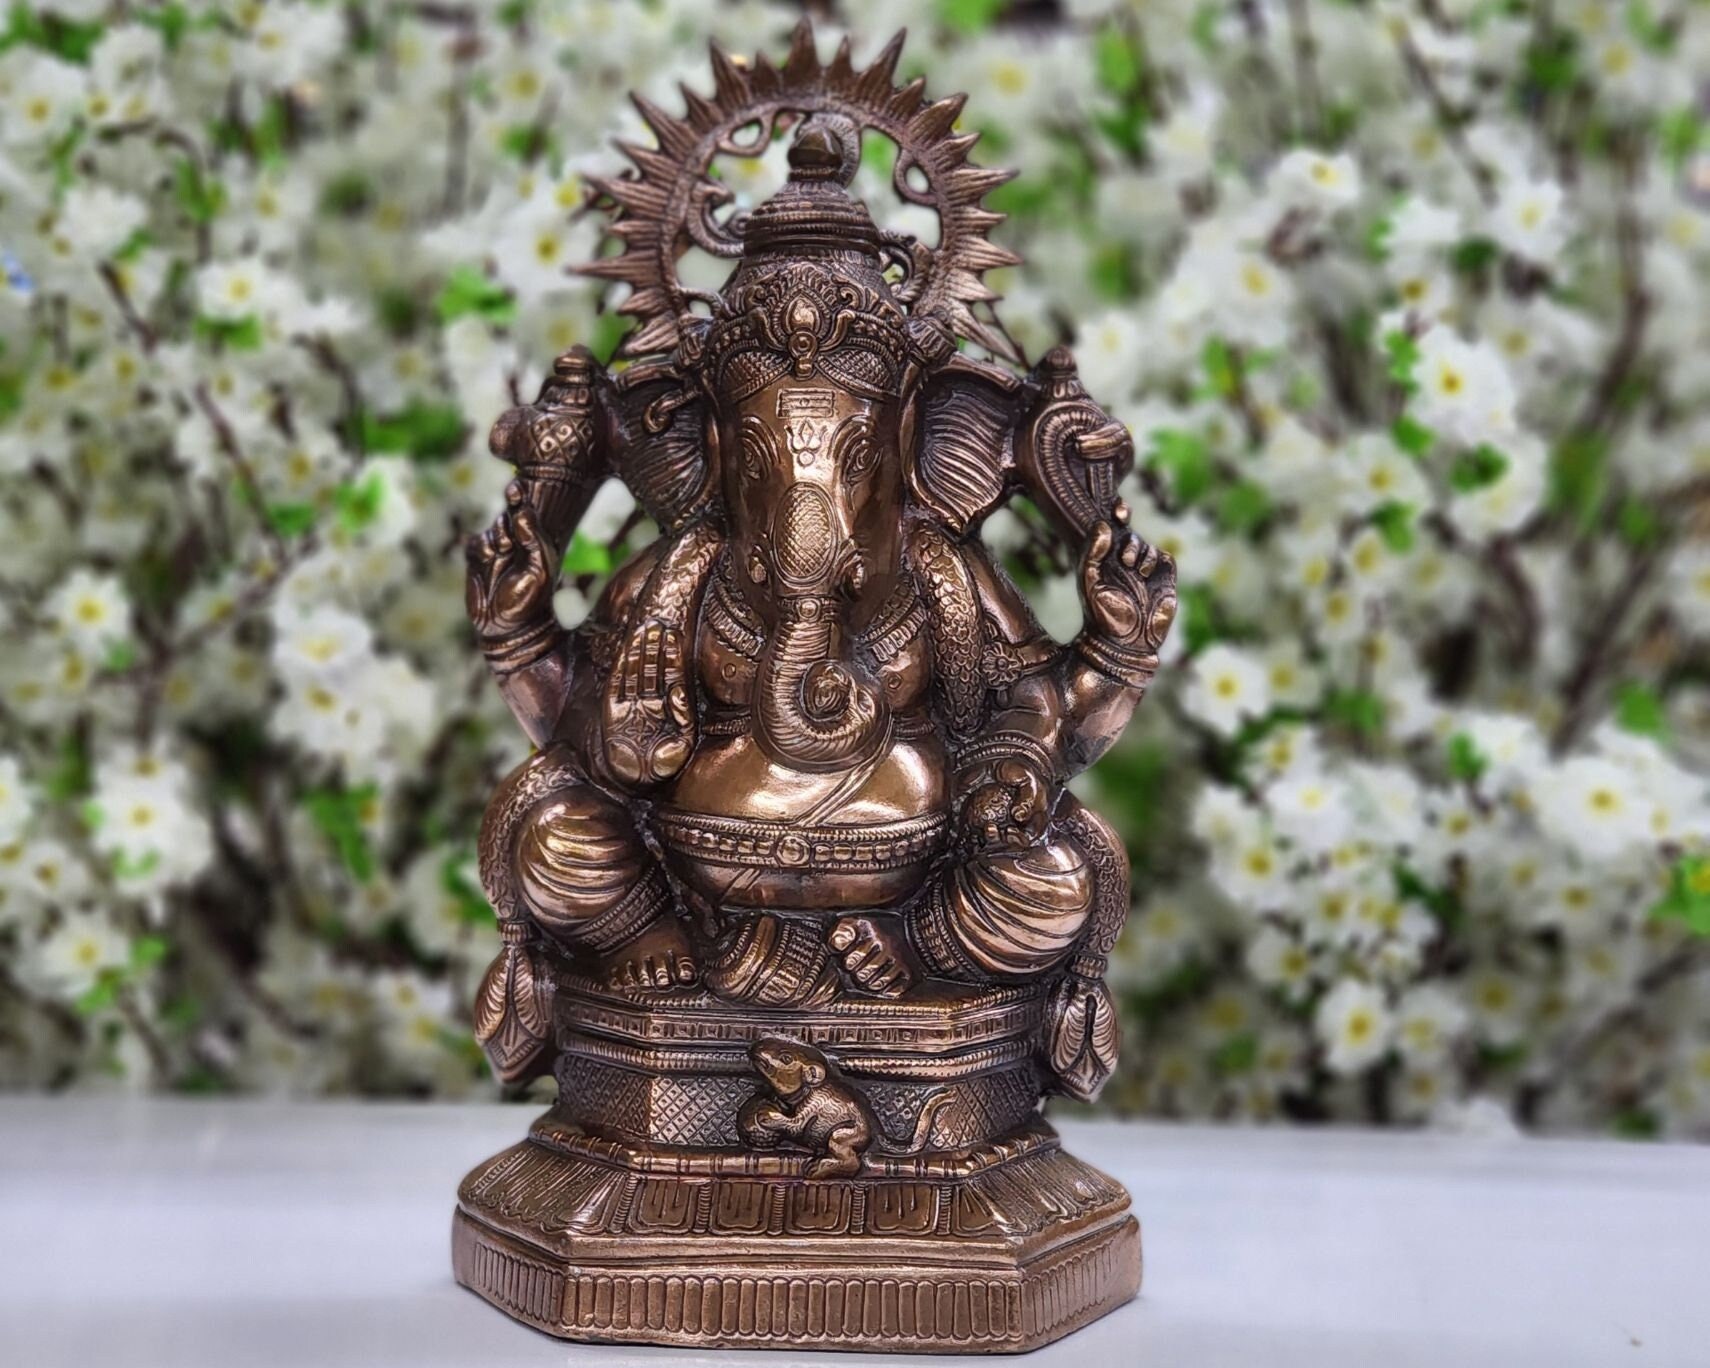 Top Collection Ganesh Statue - Lord of Success Ganesha Hindu God Sculpture  in Premium Cold Cast Bronze - 7.6-Inch Collectible New Age Figurine